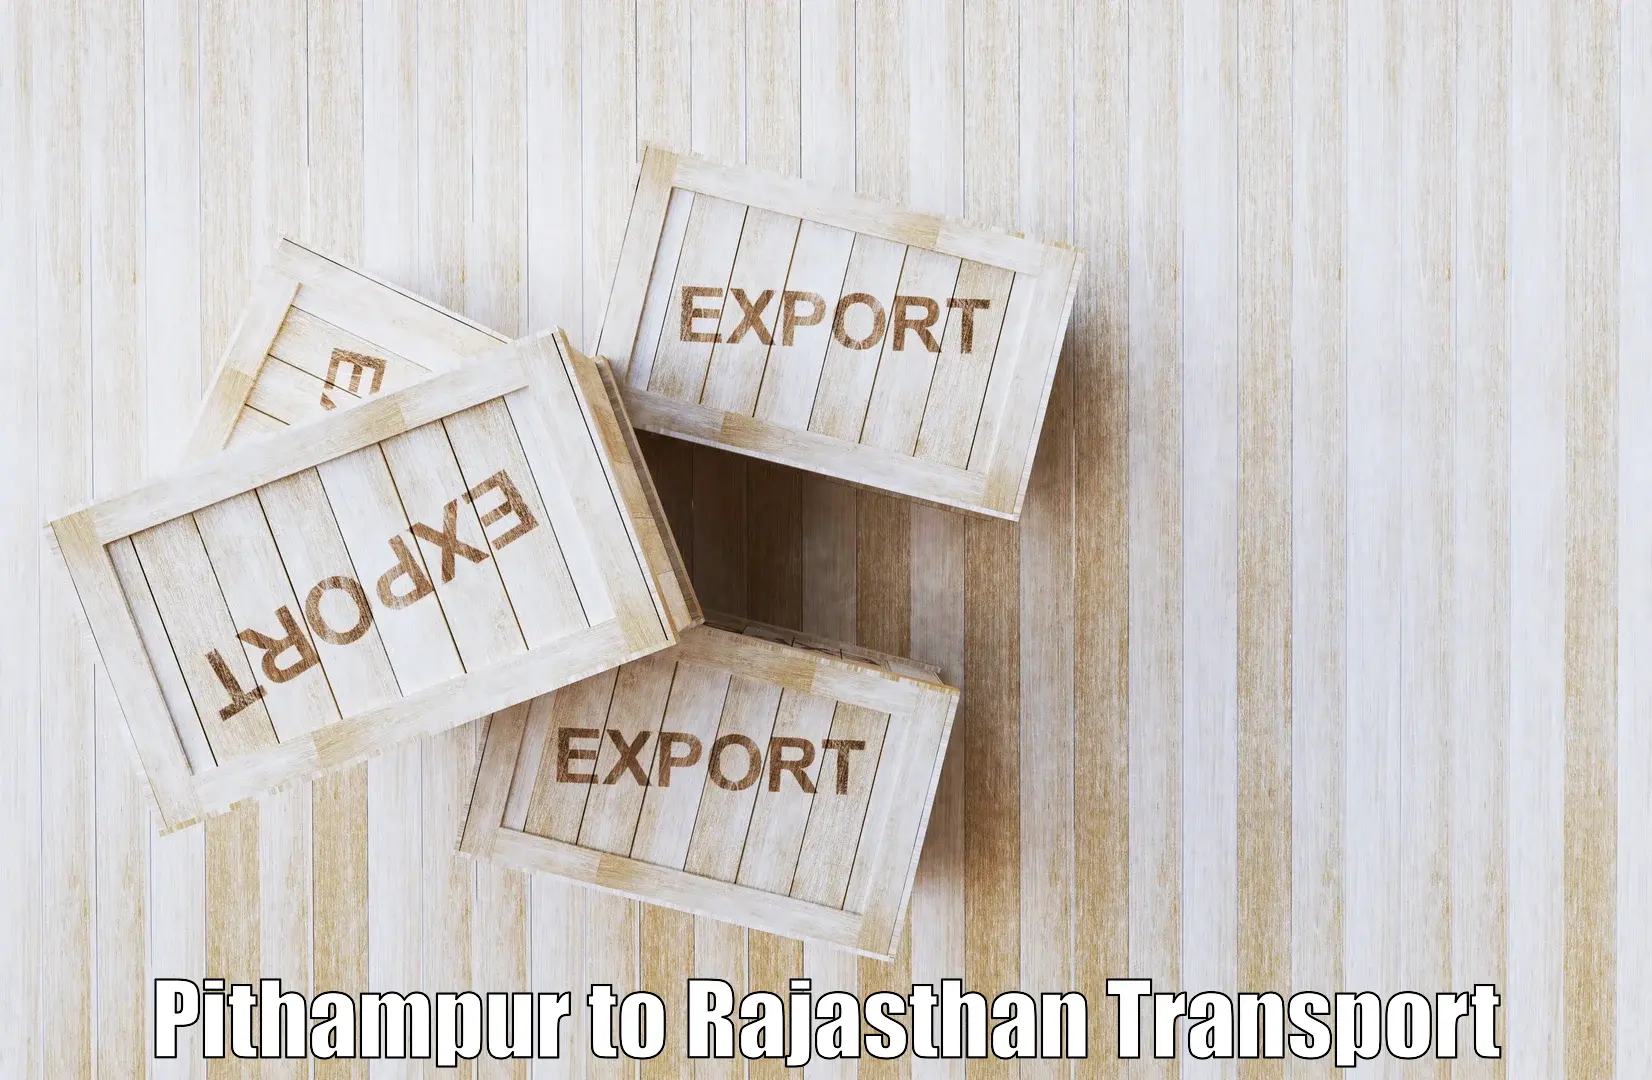 Shipping partner Pithampur to Chaumahla